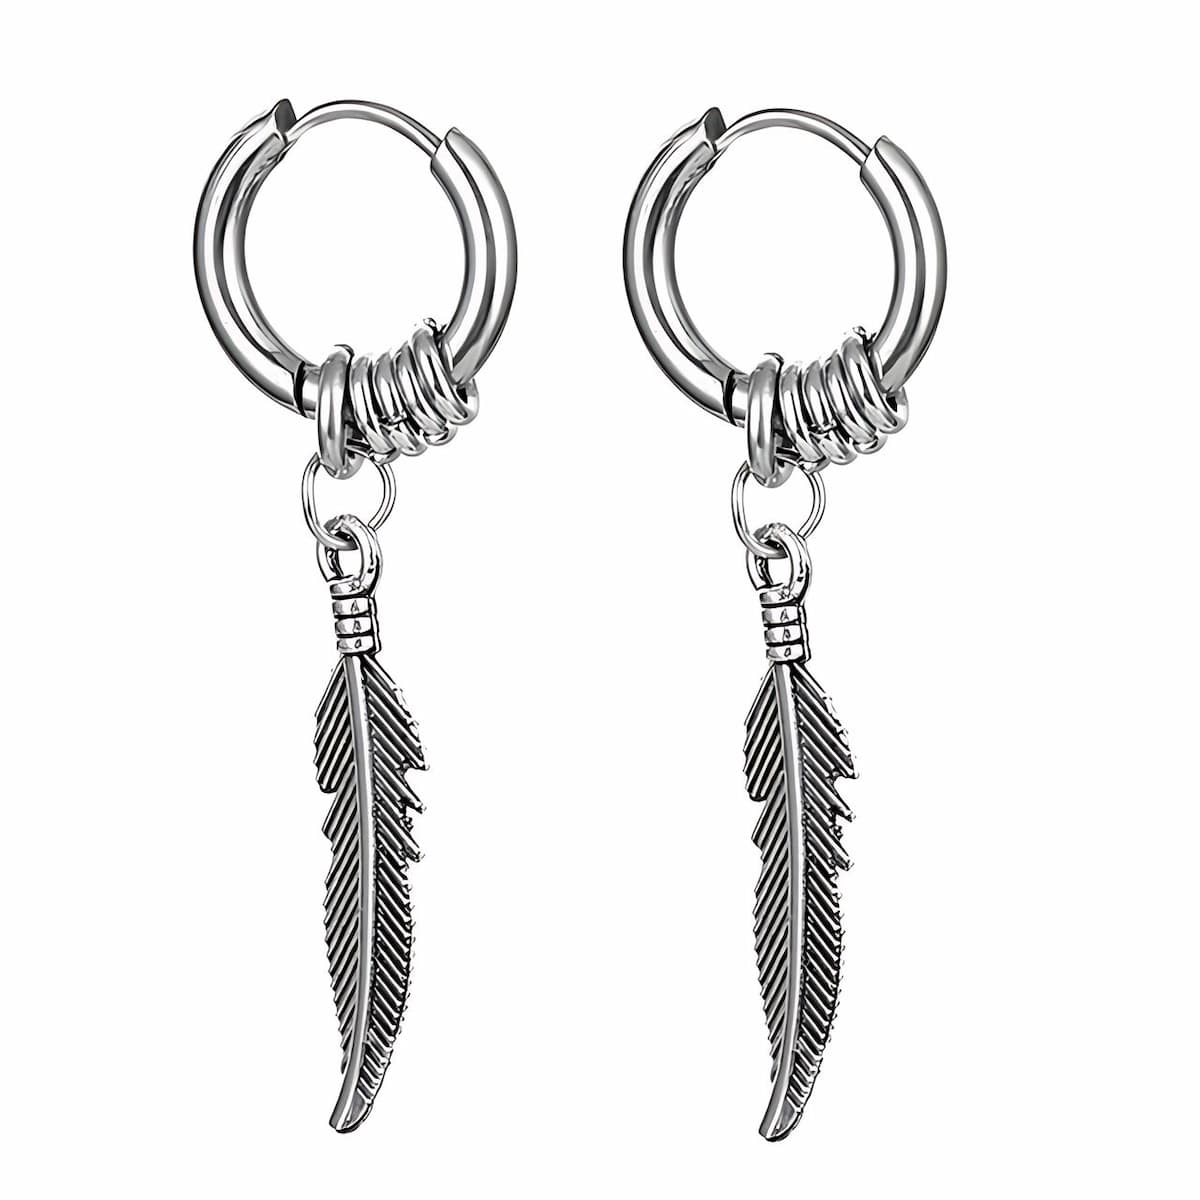 Stainless Steel Feather Earrings Silver Xenos Jewelry